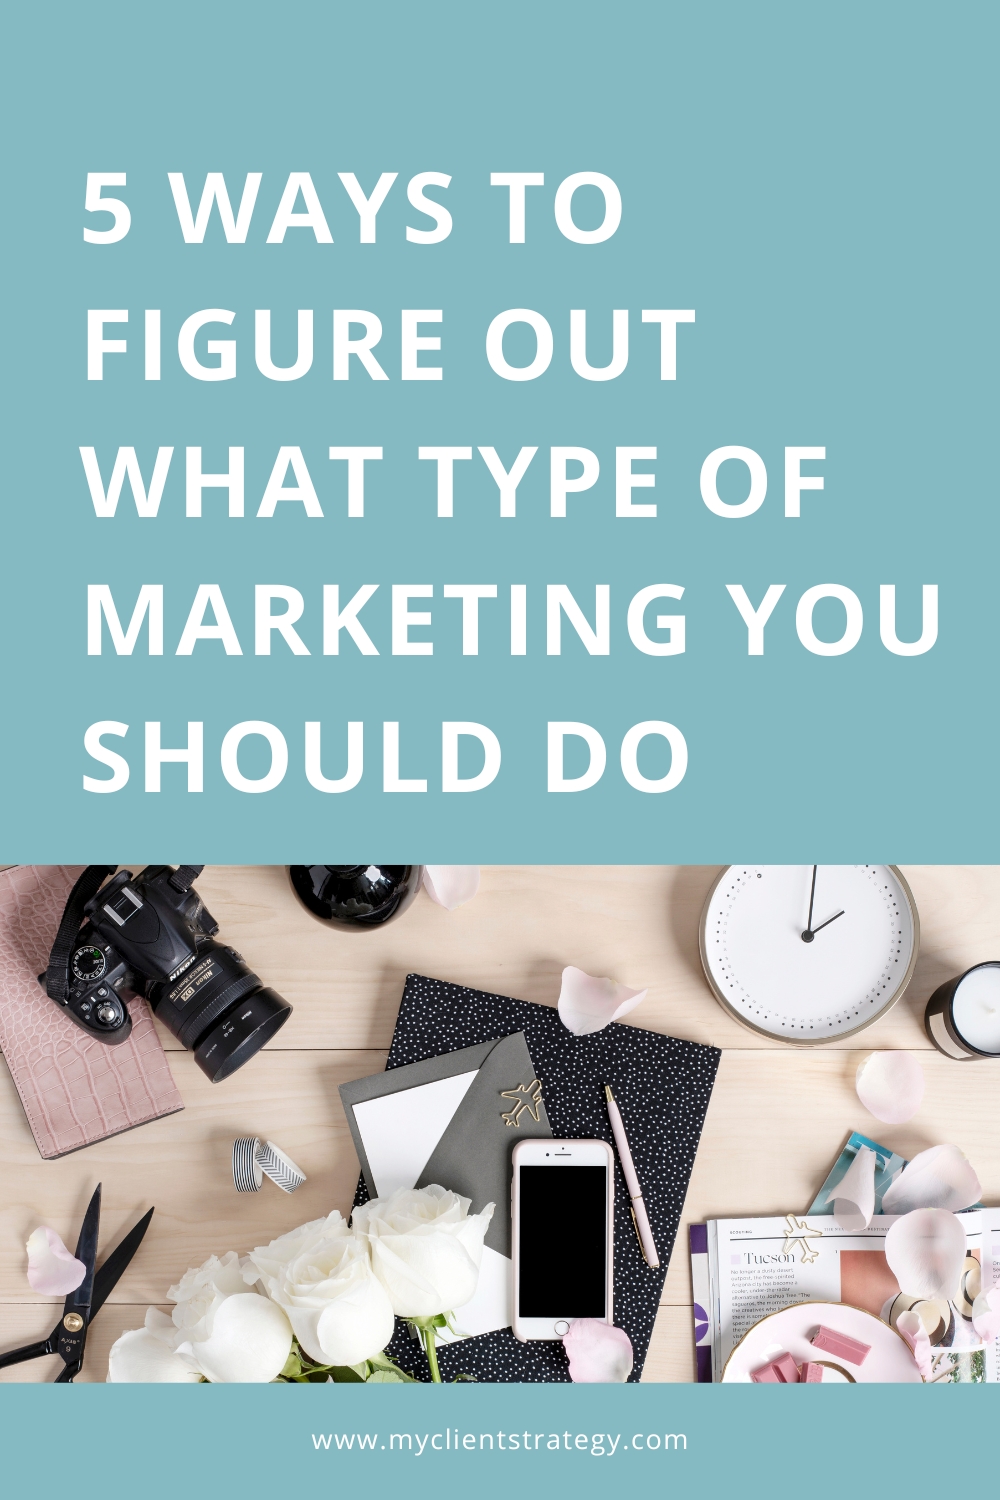 5 Ways to figure out what type of marketing you should do